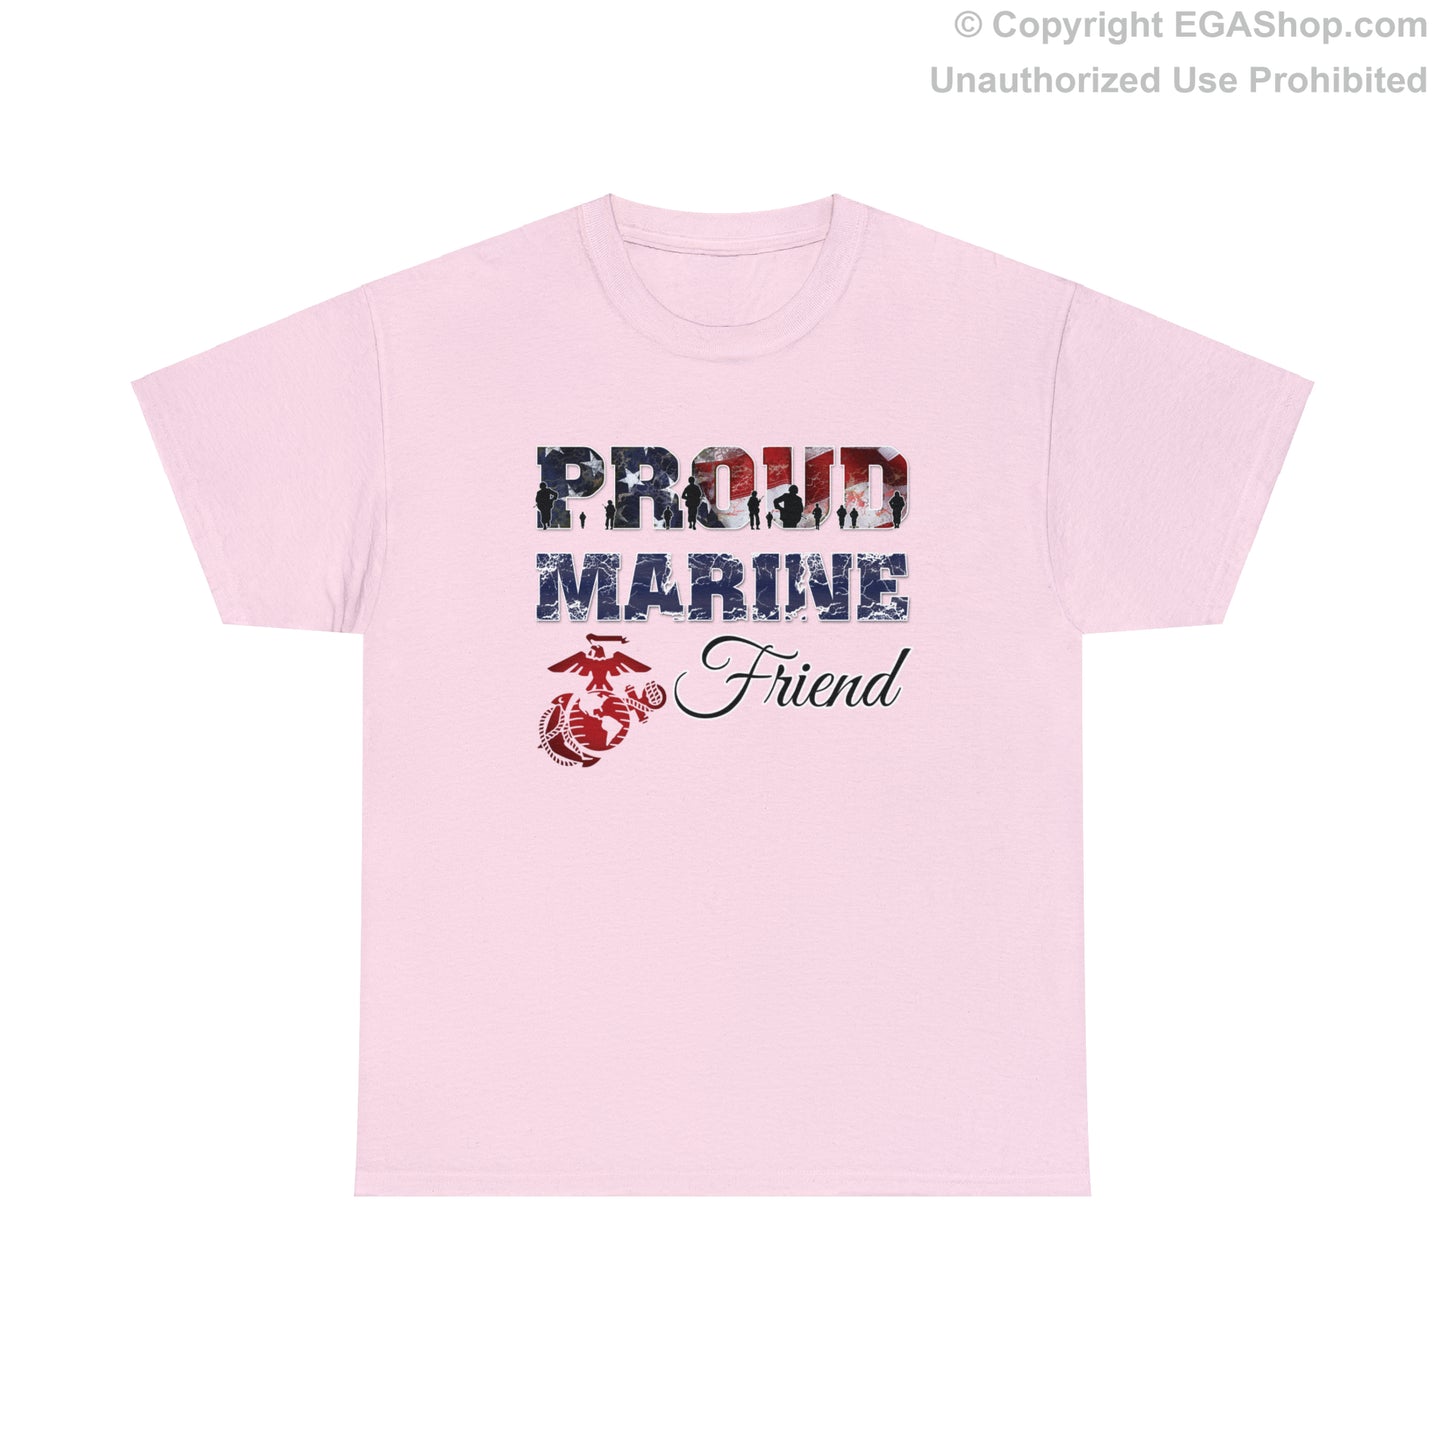 T-Shirt Proud Marine Friend (Your Choice of Colors)